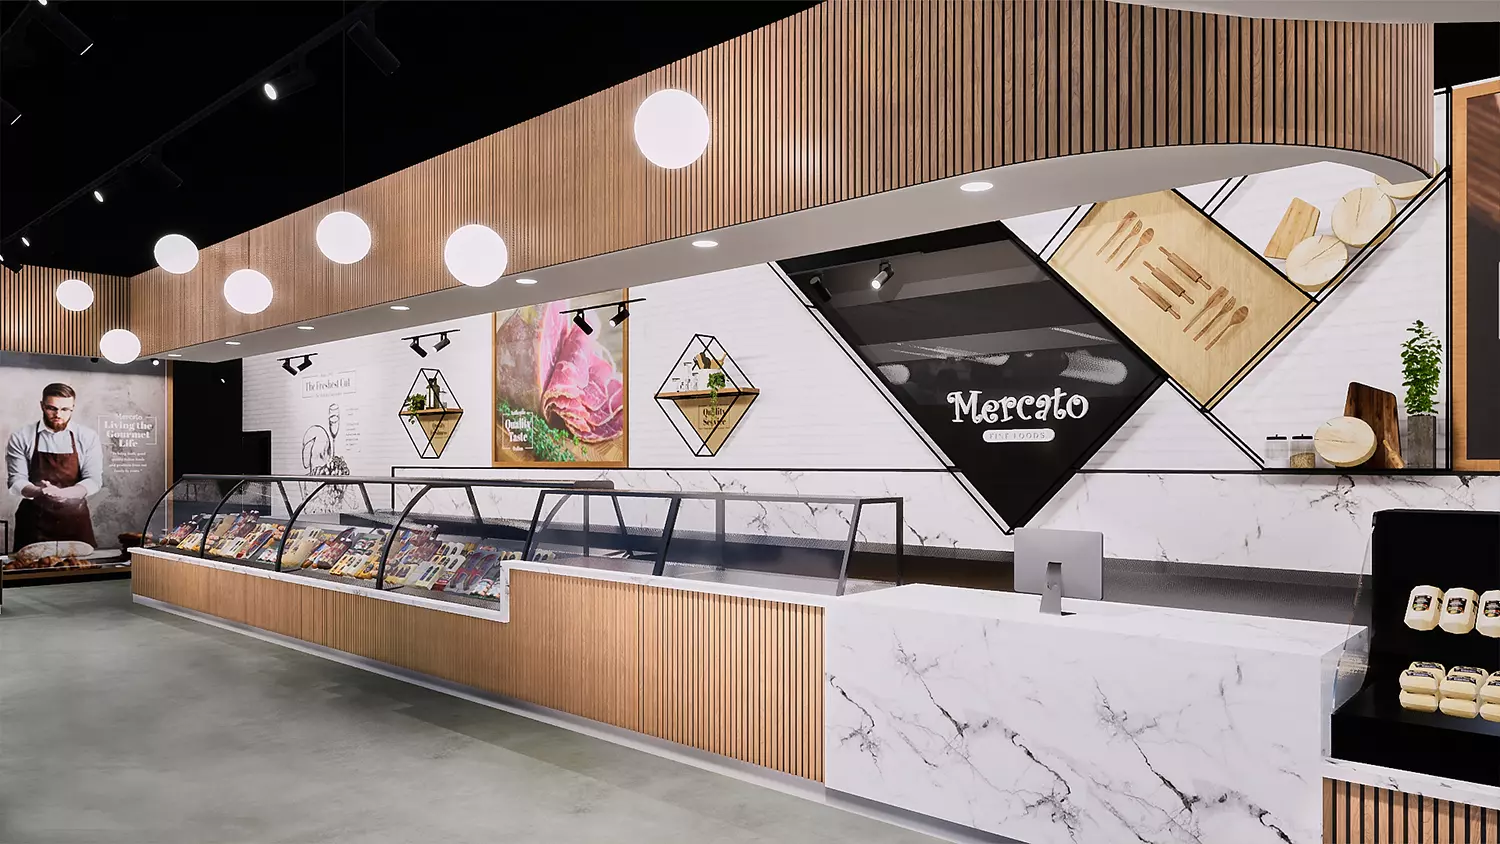 Interior design project for Mercato Fine Foods. Designed detailed drawings of the food market wall surface